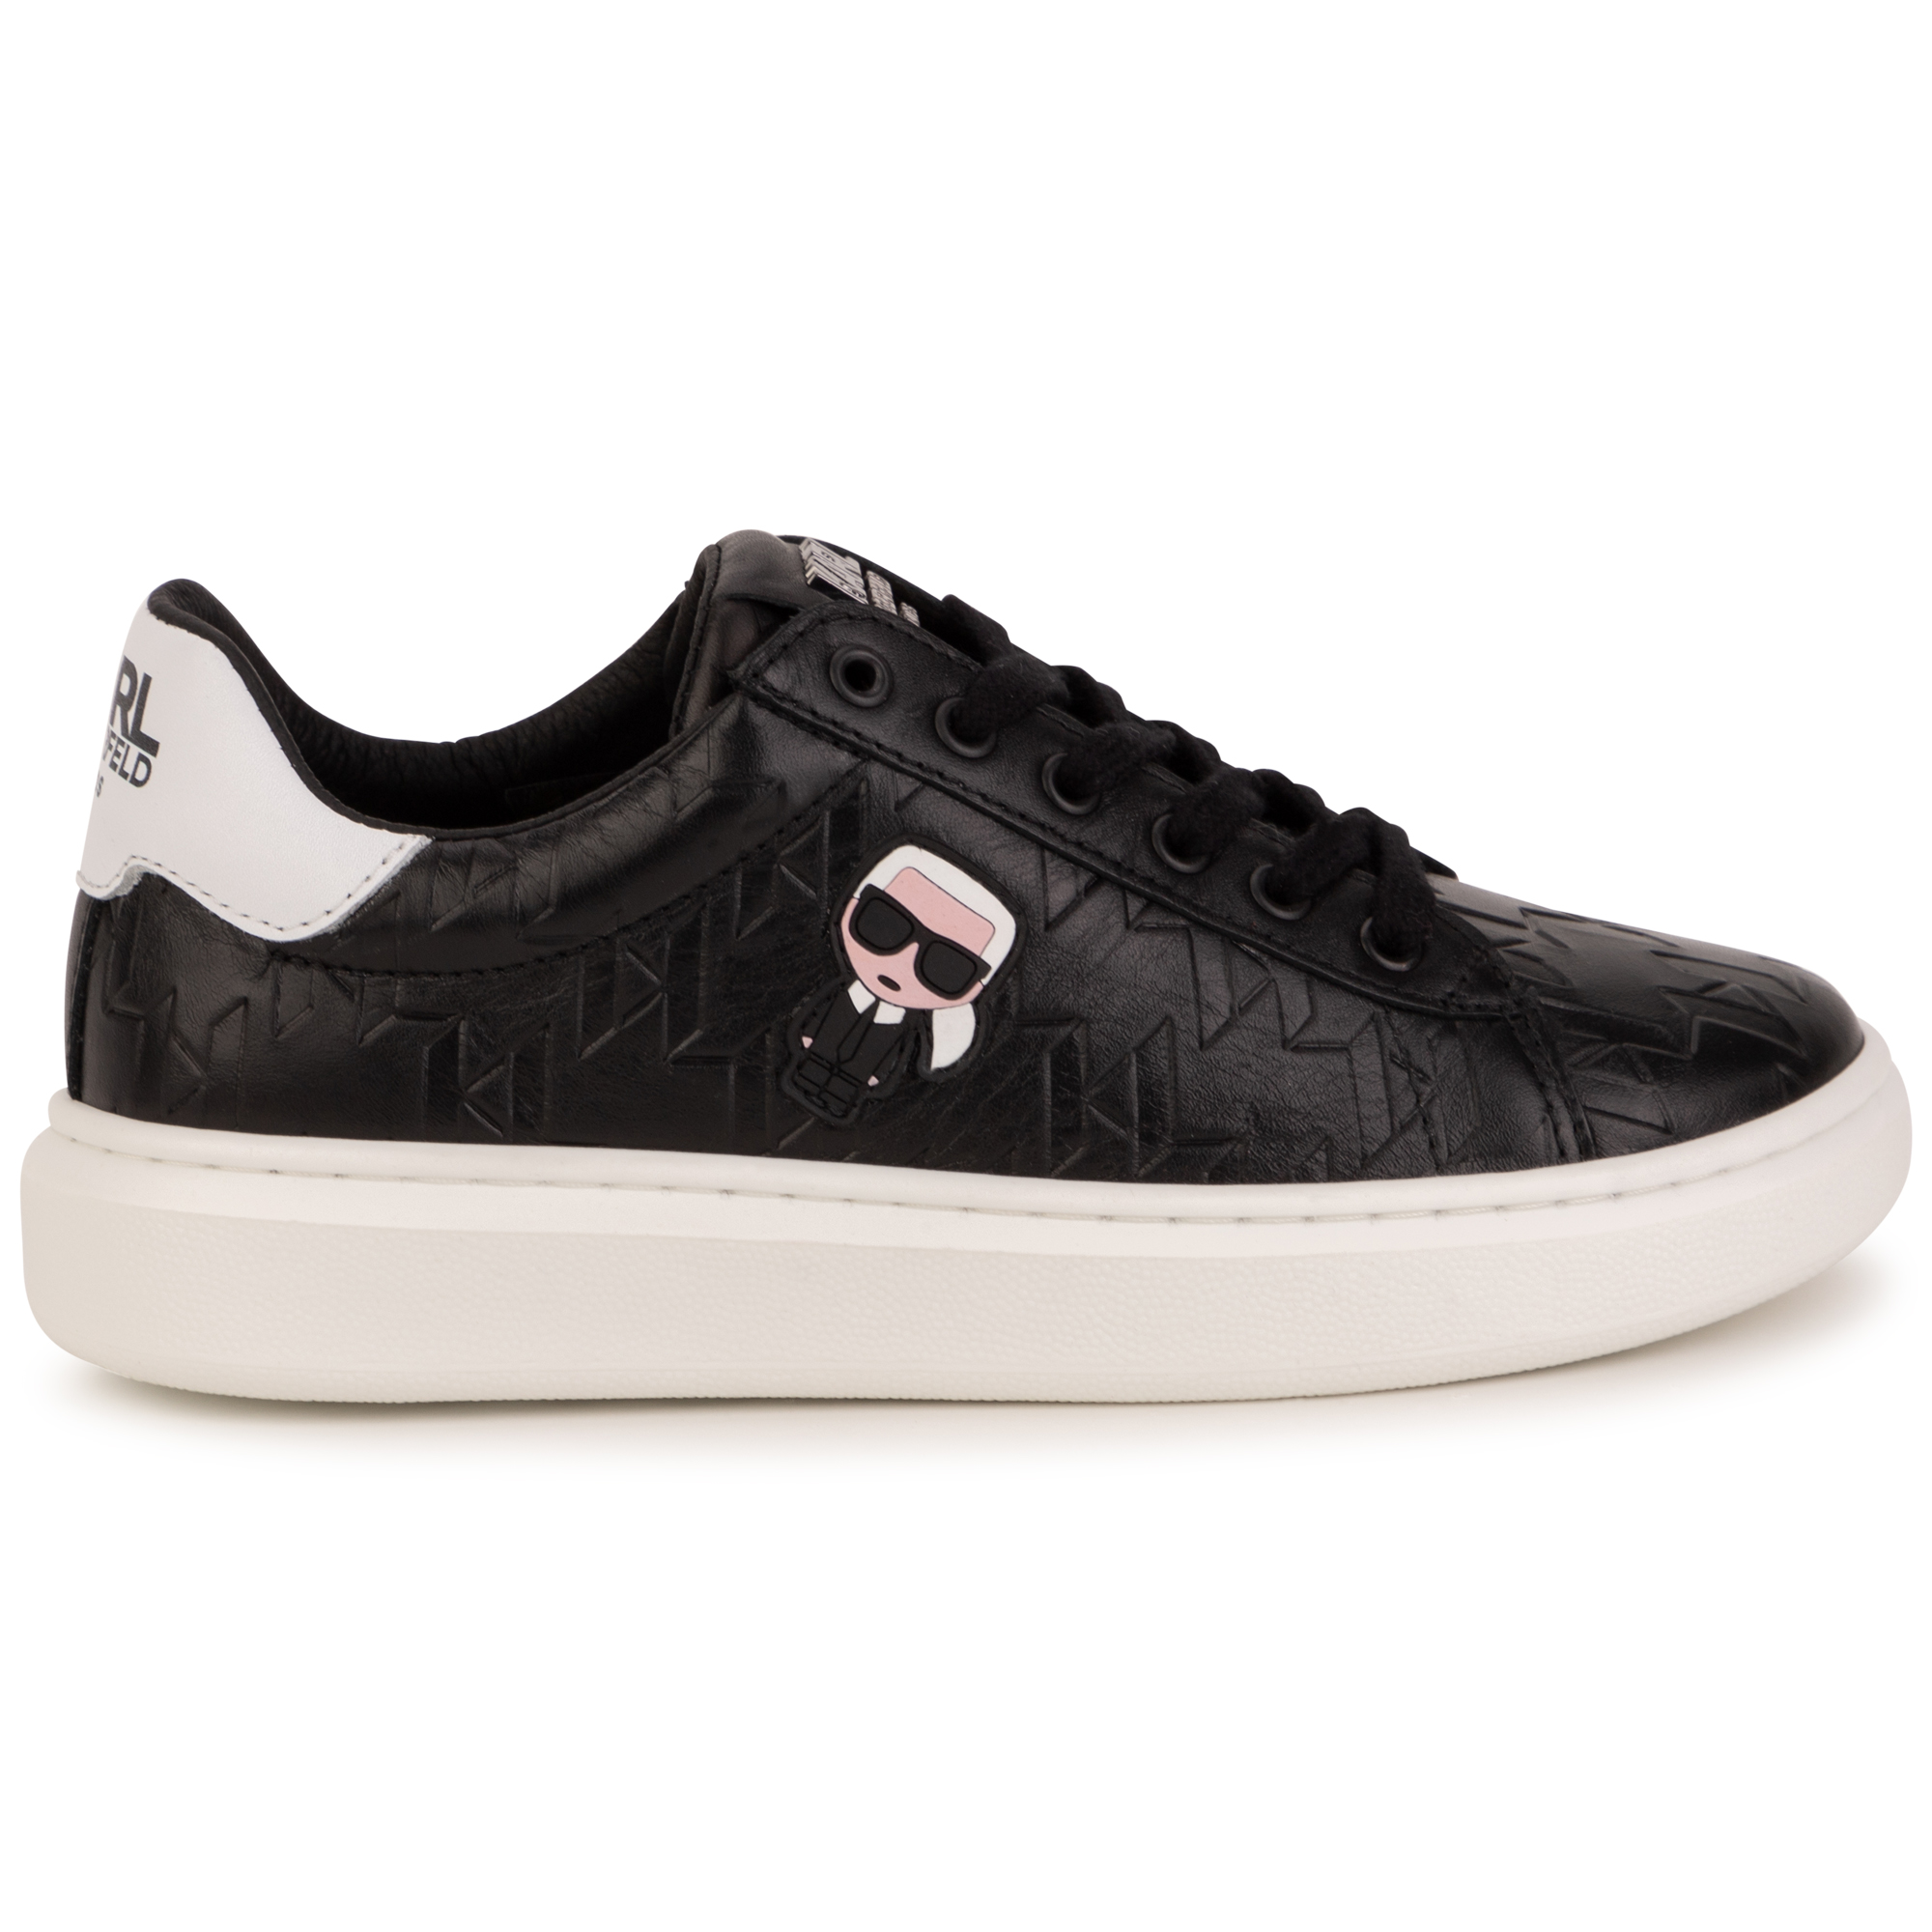 Leather trainers KARL LAGERFELD KIDS for BOY